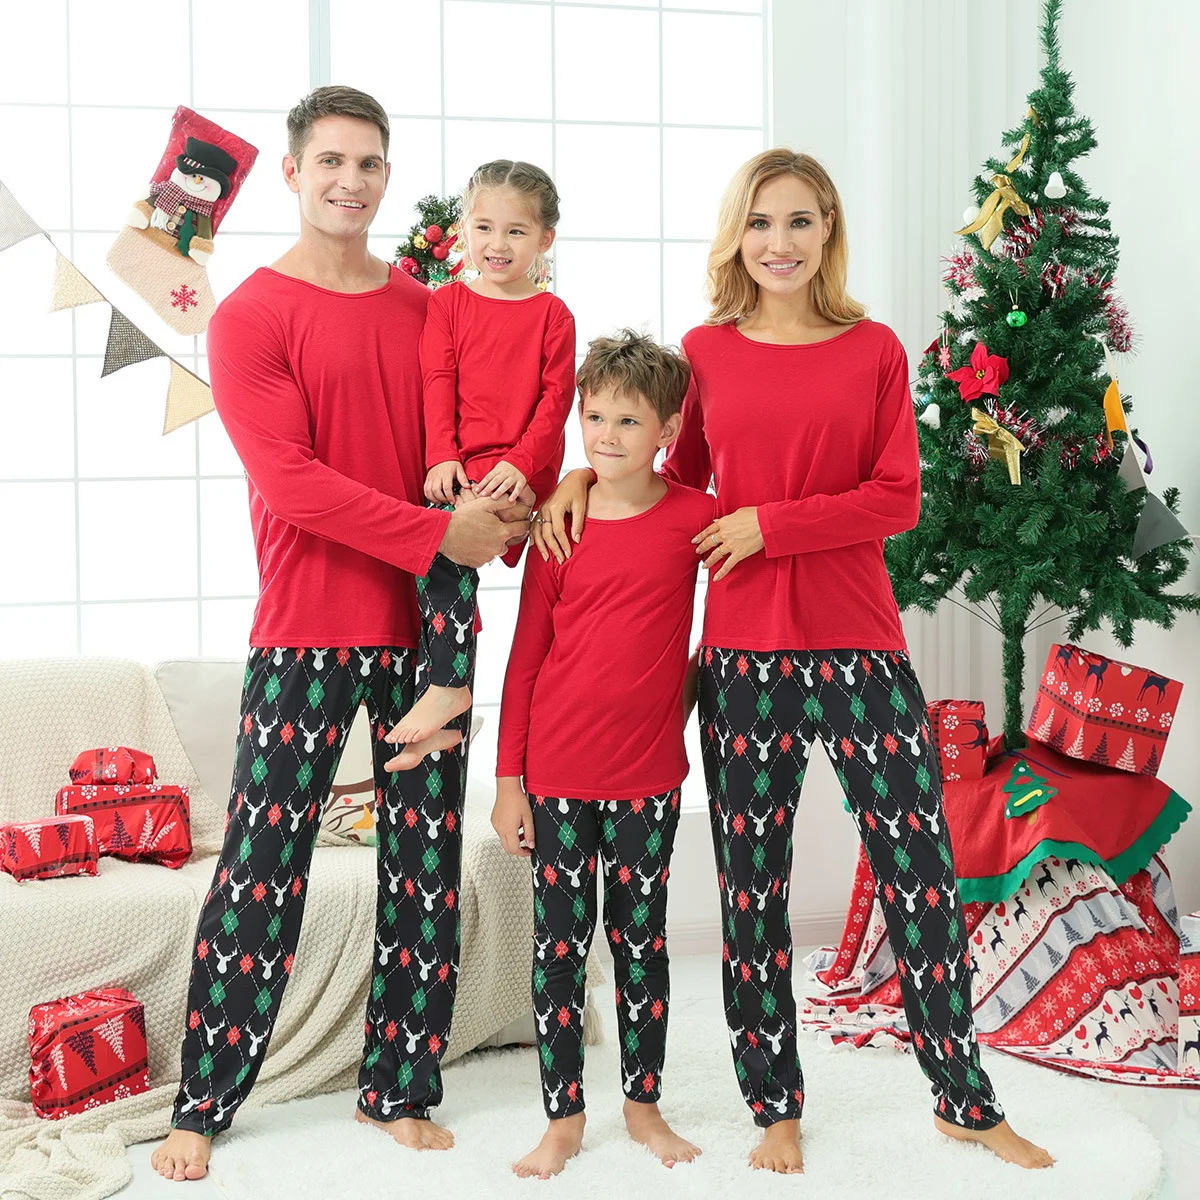 

Christmas Family Matching Pajama Sets Red Mother Daughter Father Son Outfits Sleepwear Xmas Homewear Pyjamas Clothes